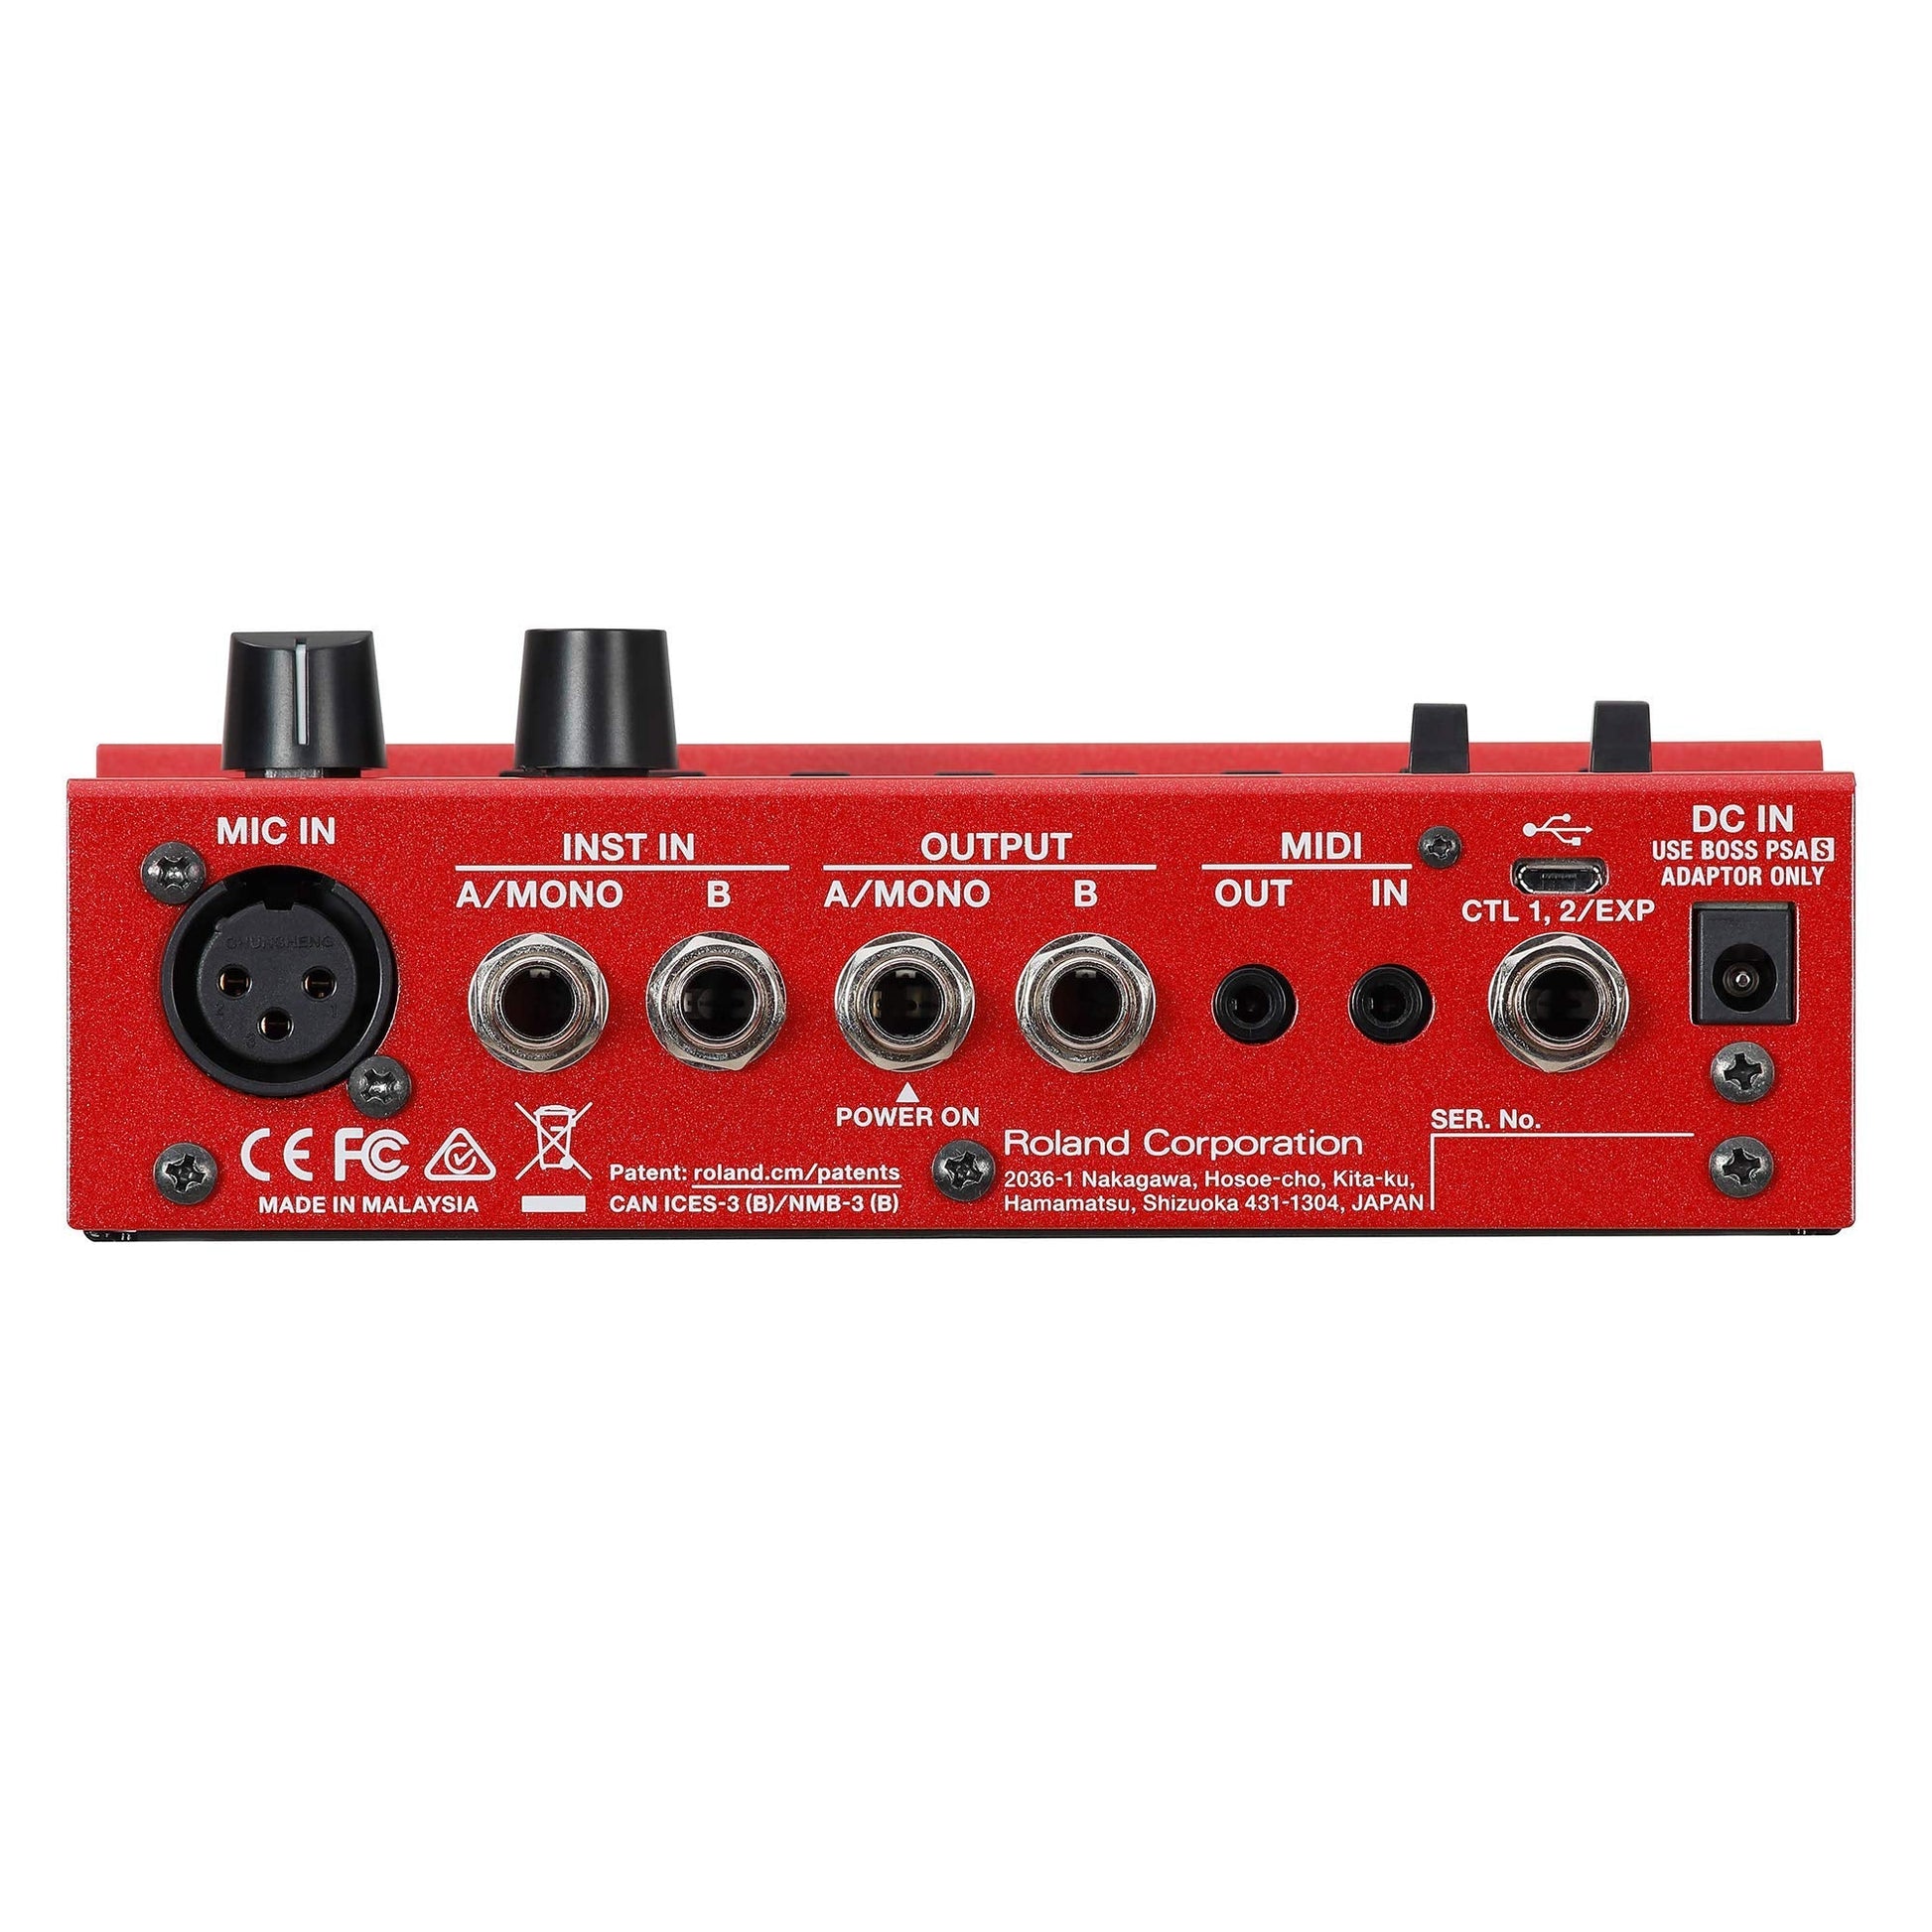 Pedal Guitar Boss RC-500 Loop Station - Việt Music